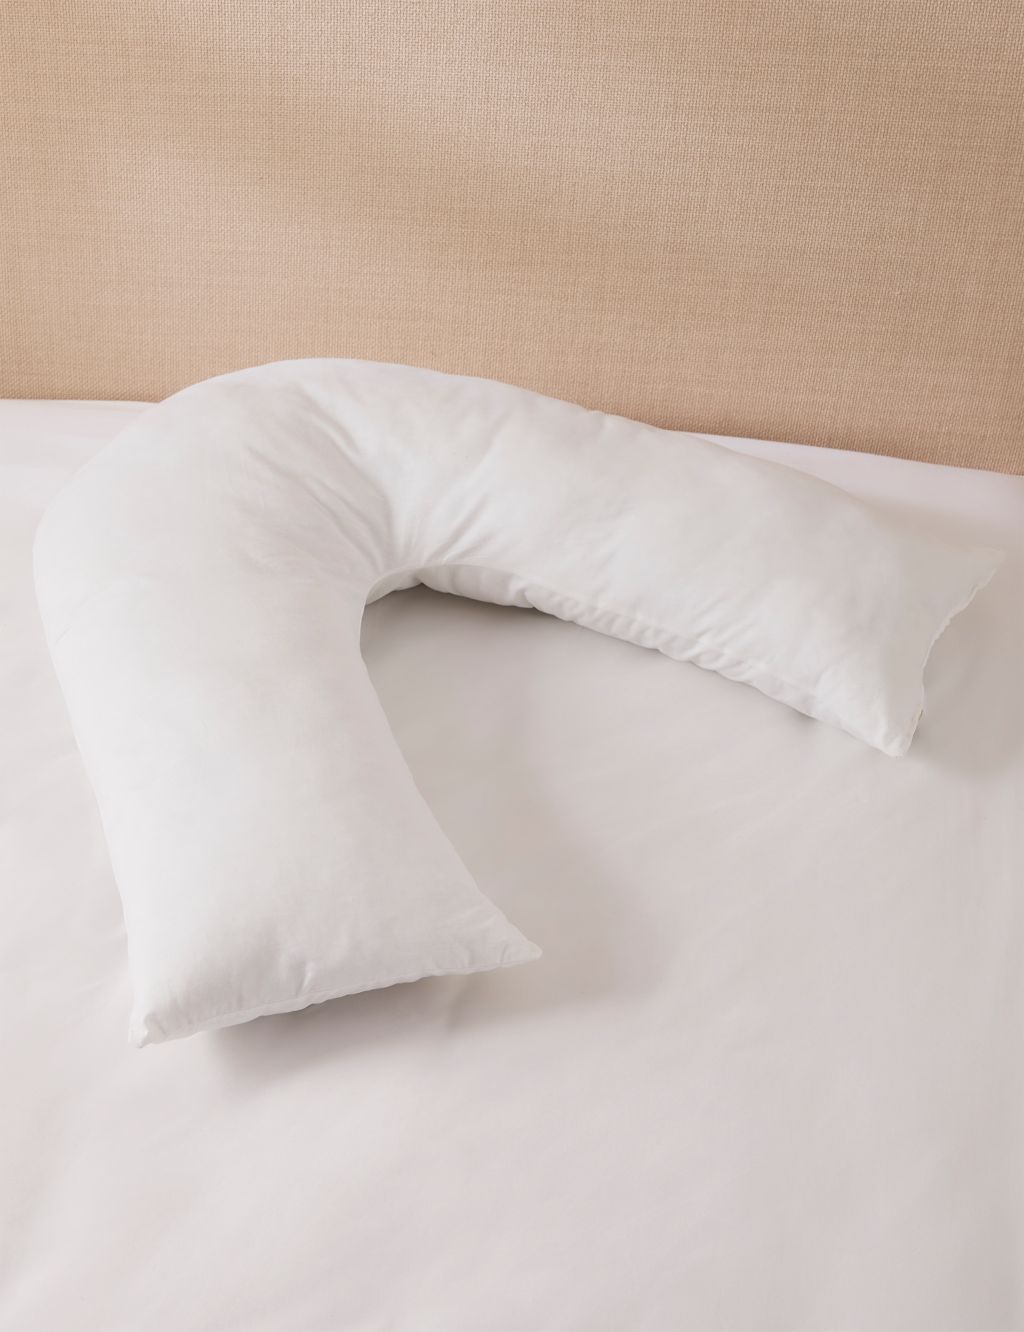 Sleep Solutions Medium V-Shaped Pillow with Pillowcase image 3